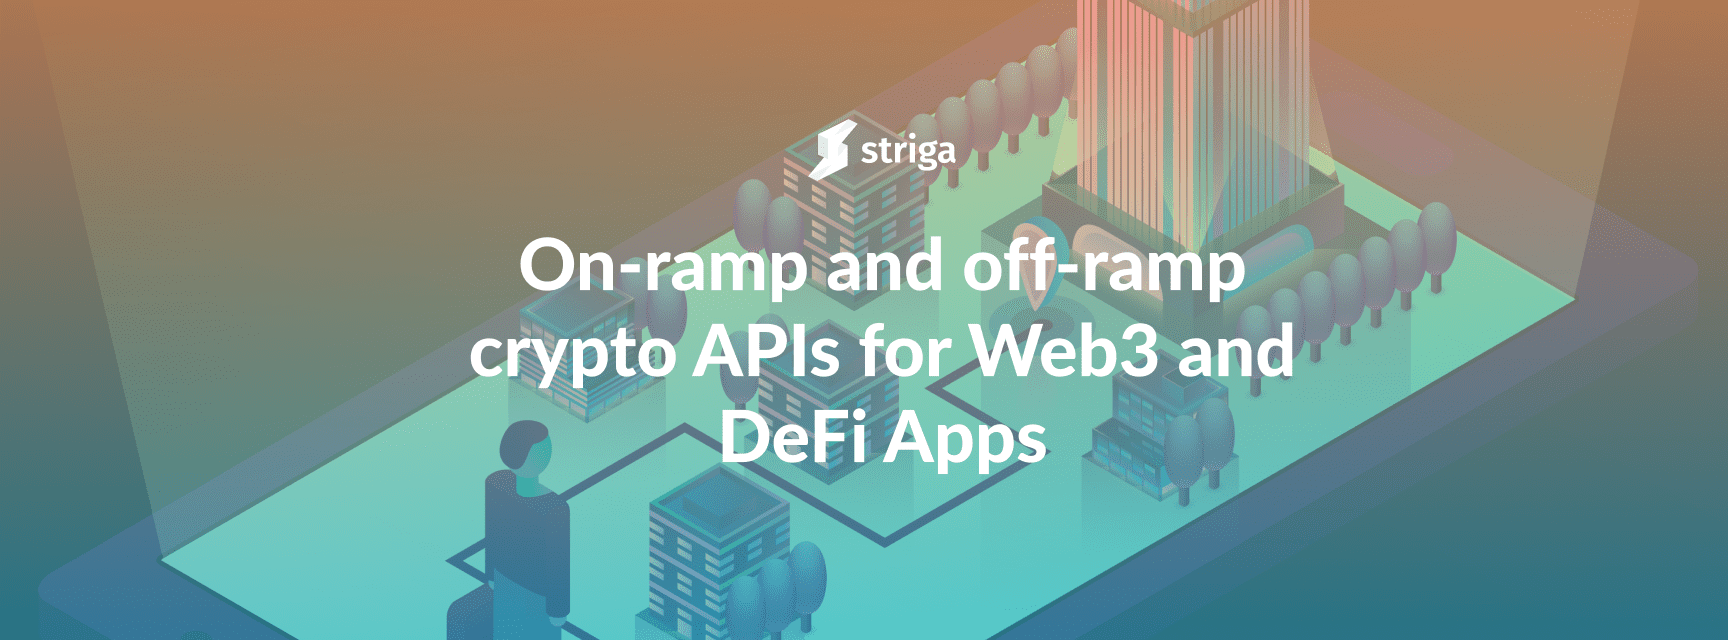 Maximizing Your Web3 Crypto Experience OnRamp and OffRamp Strategies